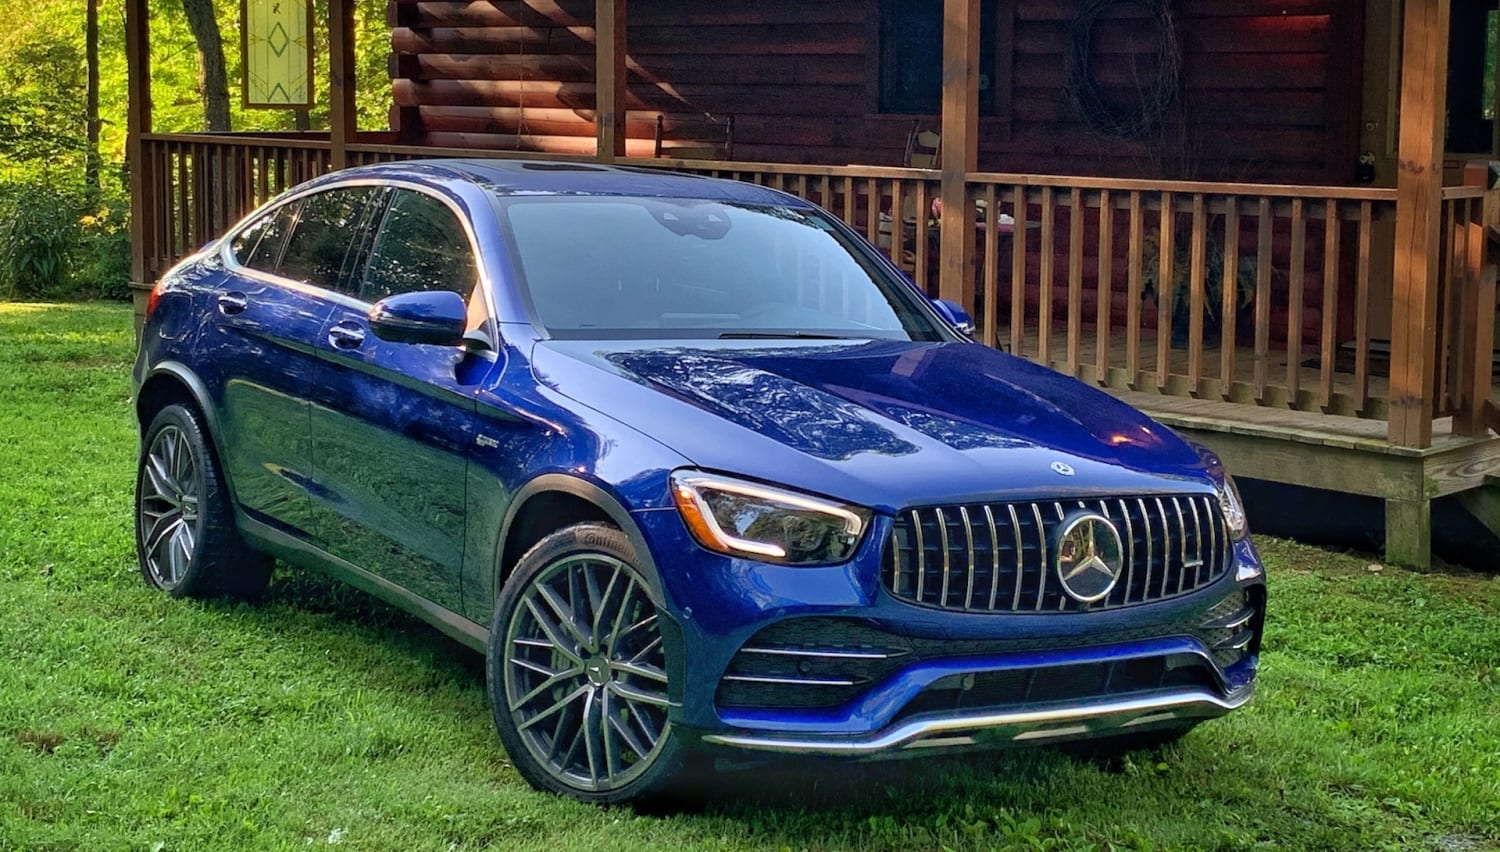 2020 Mercedes-AMG GLC 43 Coupe: Plenty Of Go, But Let's Talk About That Trunk